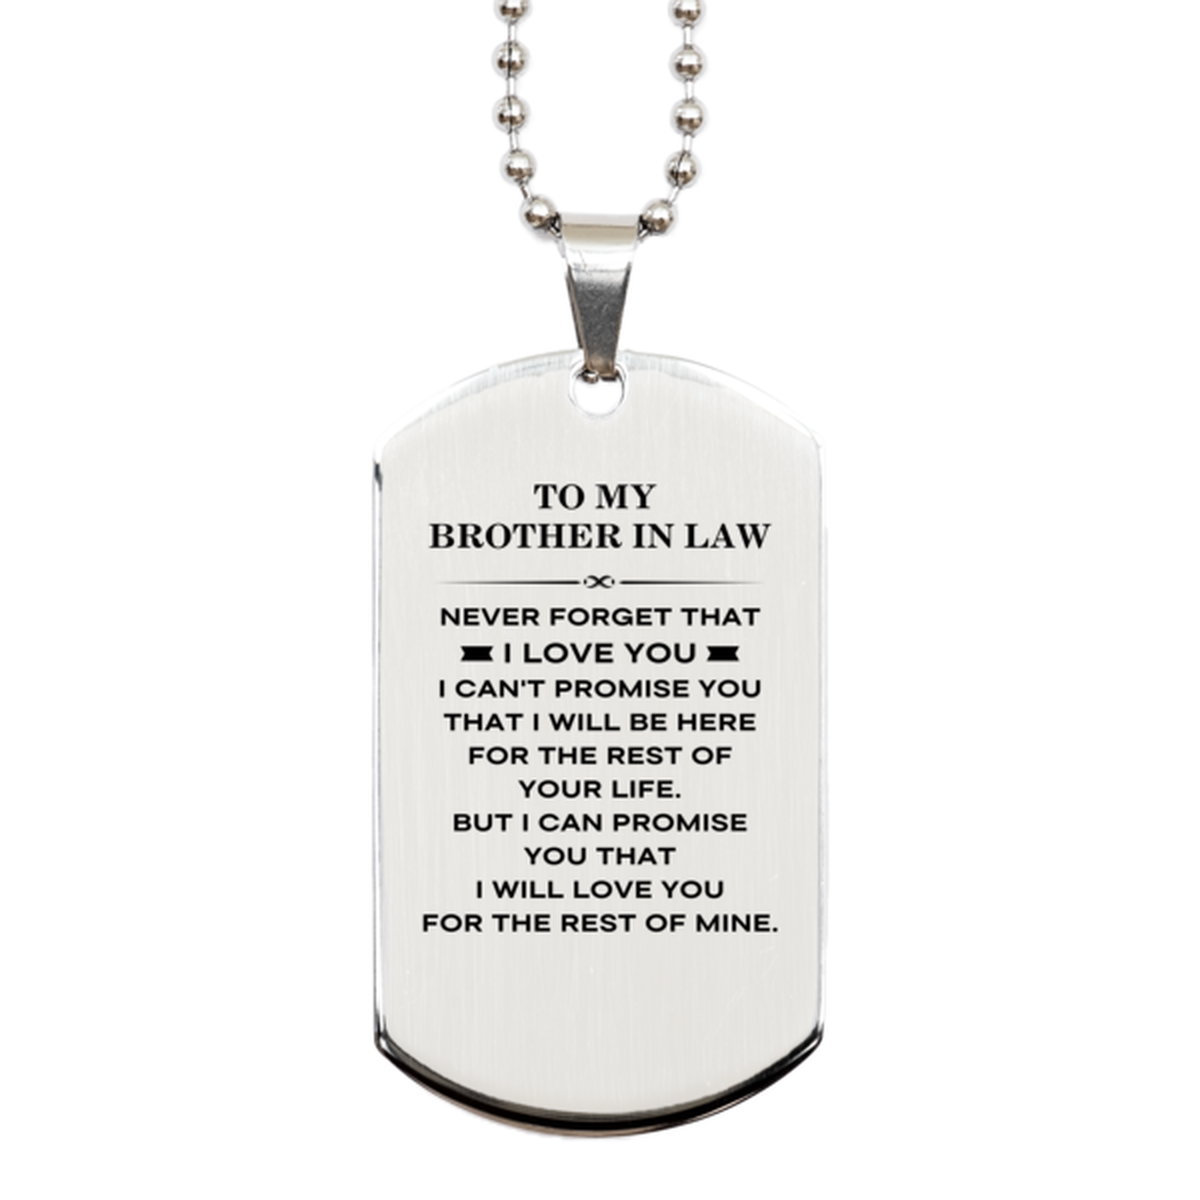 To My Brother In Law Gifts, I will love you for the rest of mine, Love Brother In Law Dog Tag Necklace, Birthday Christmas Unique Silver Dog Tag For Brother In Law